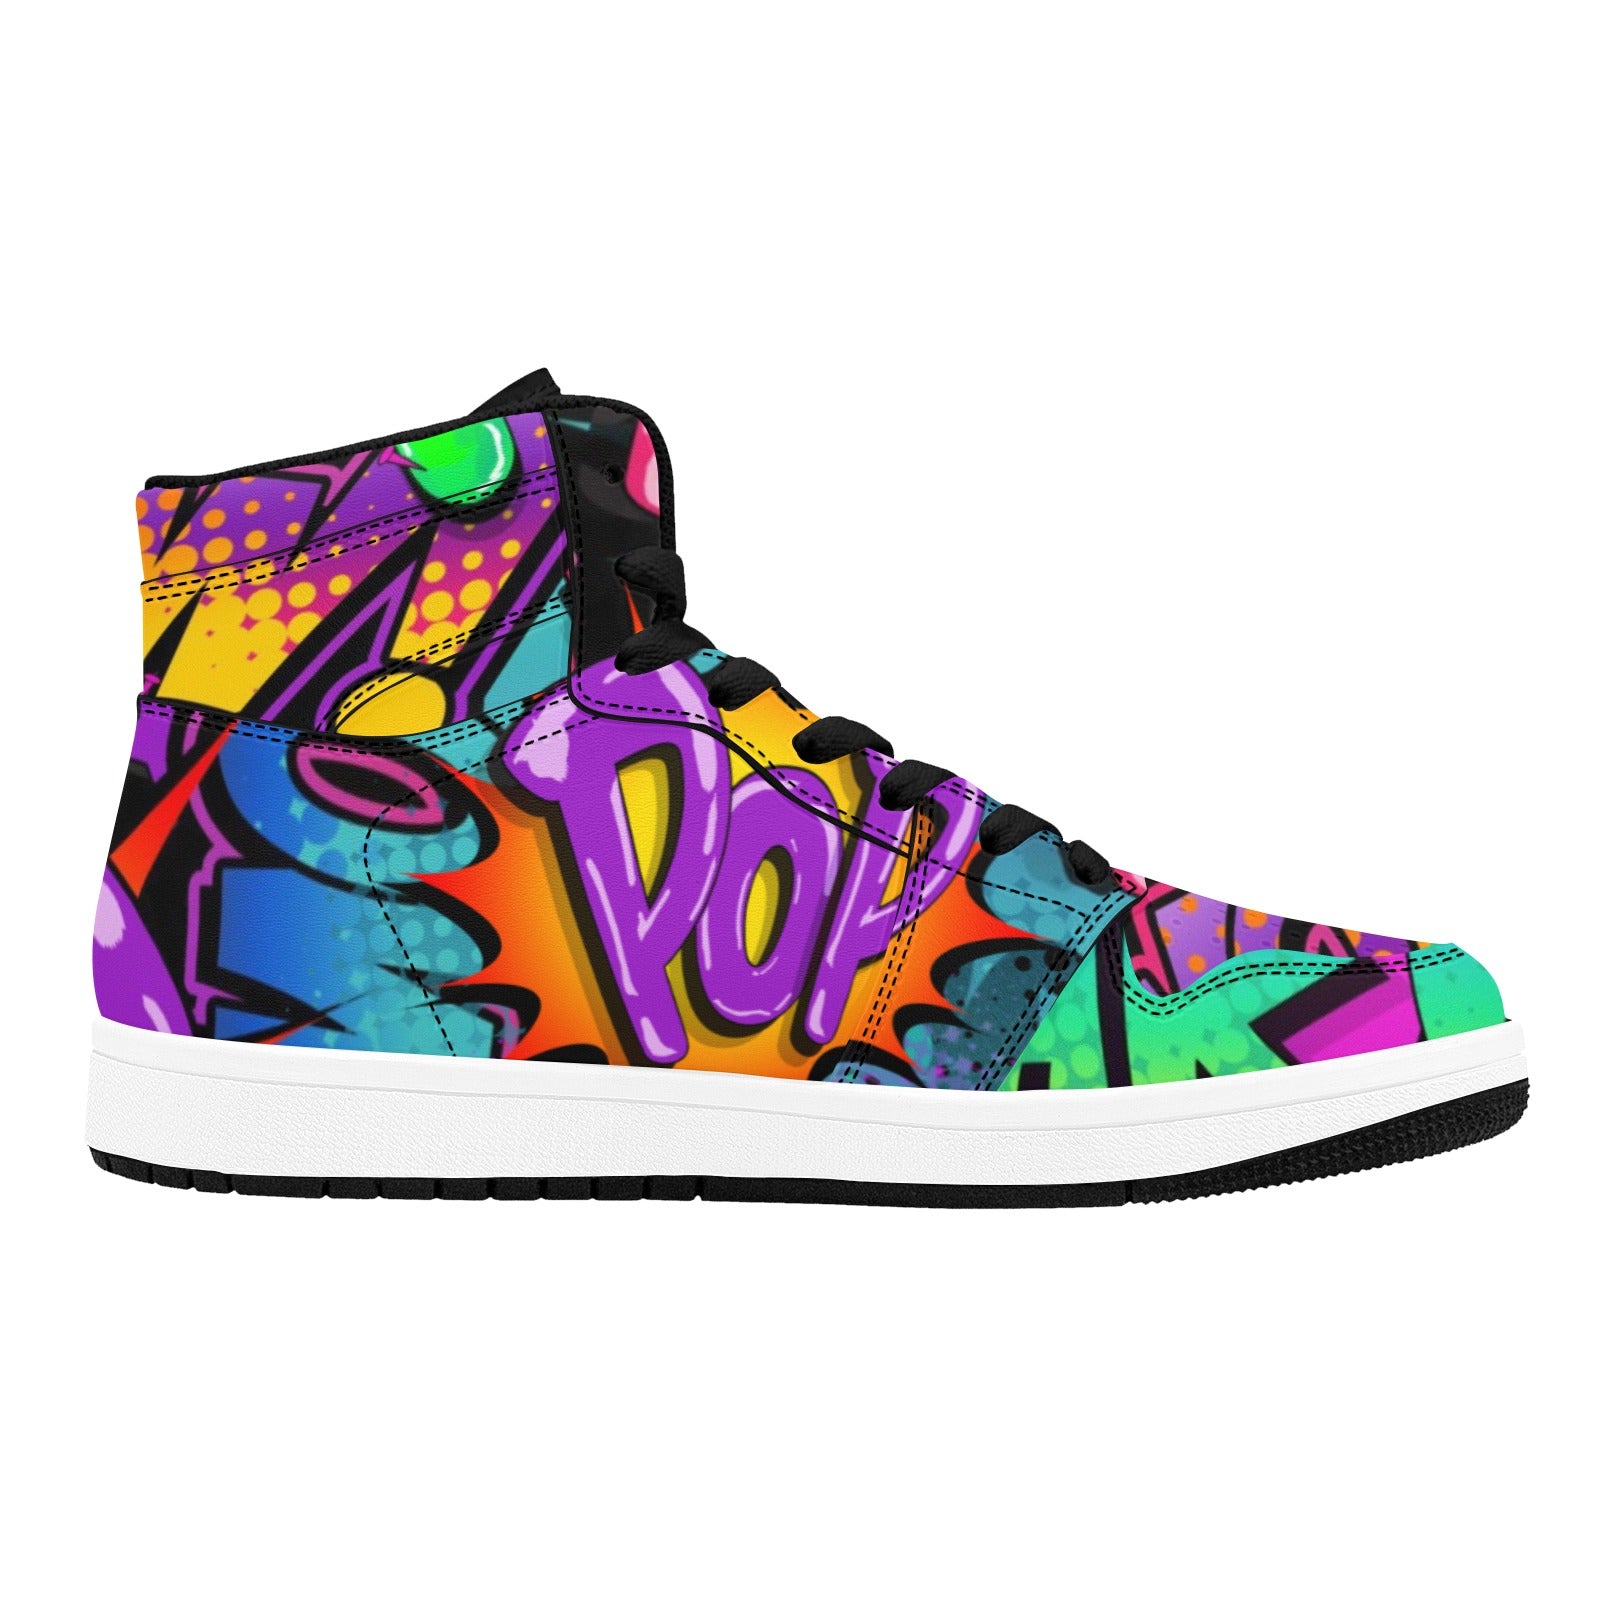 Balloon twister high tops. Fun and Colourful